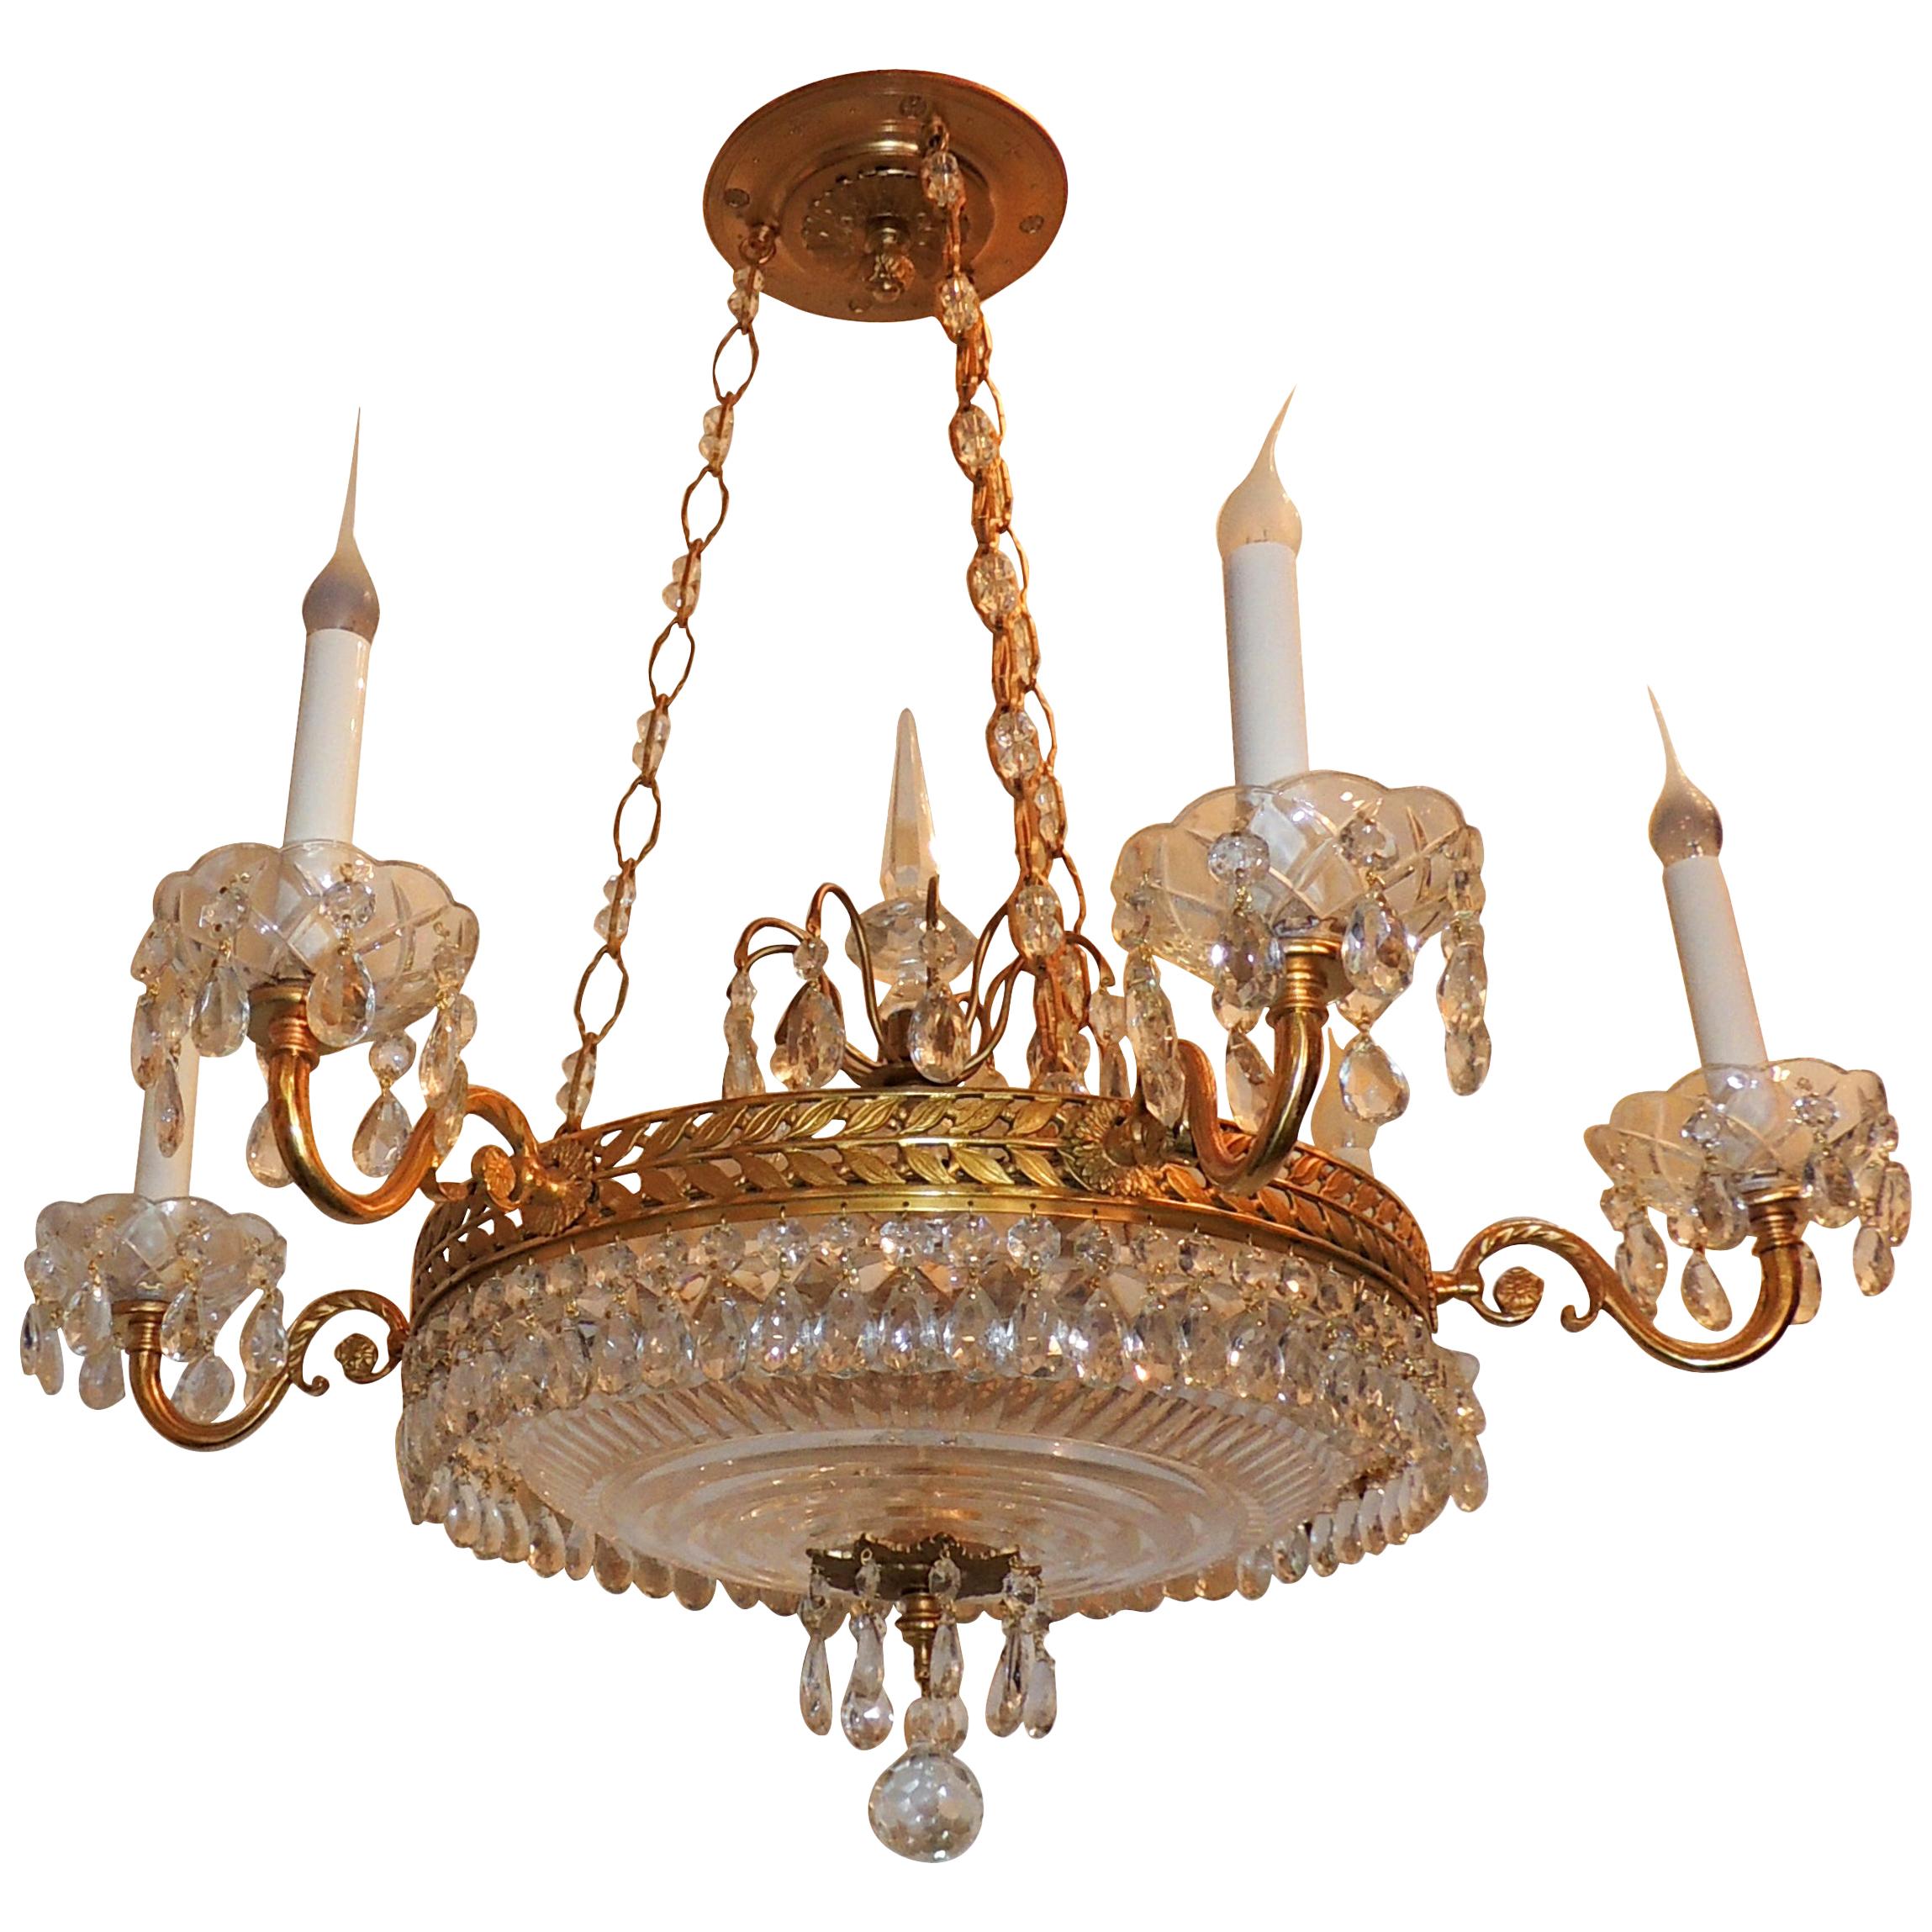 Wonderful French Dore Bronze Neoclassical Baltic Crystal Bowl Empire Chandelier For Sale